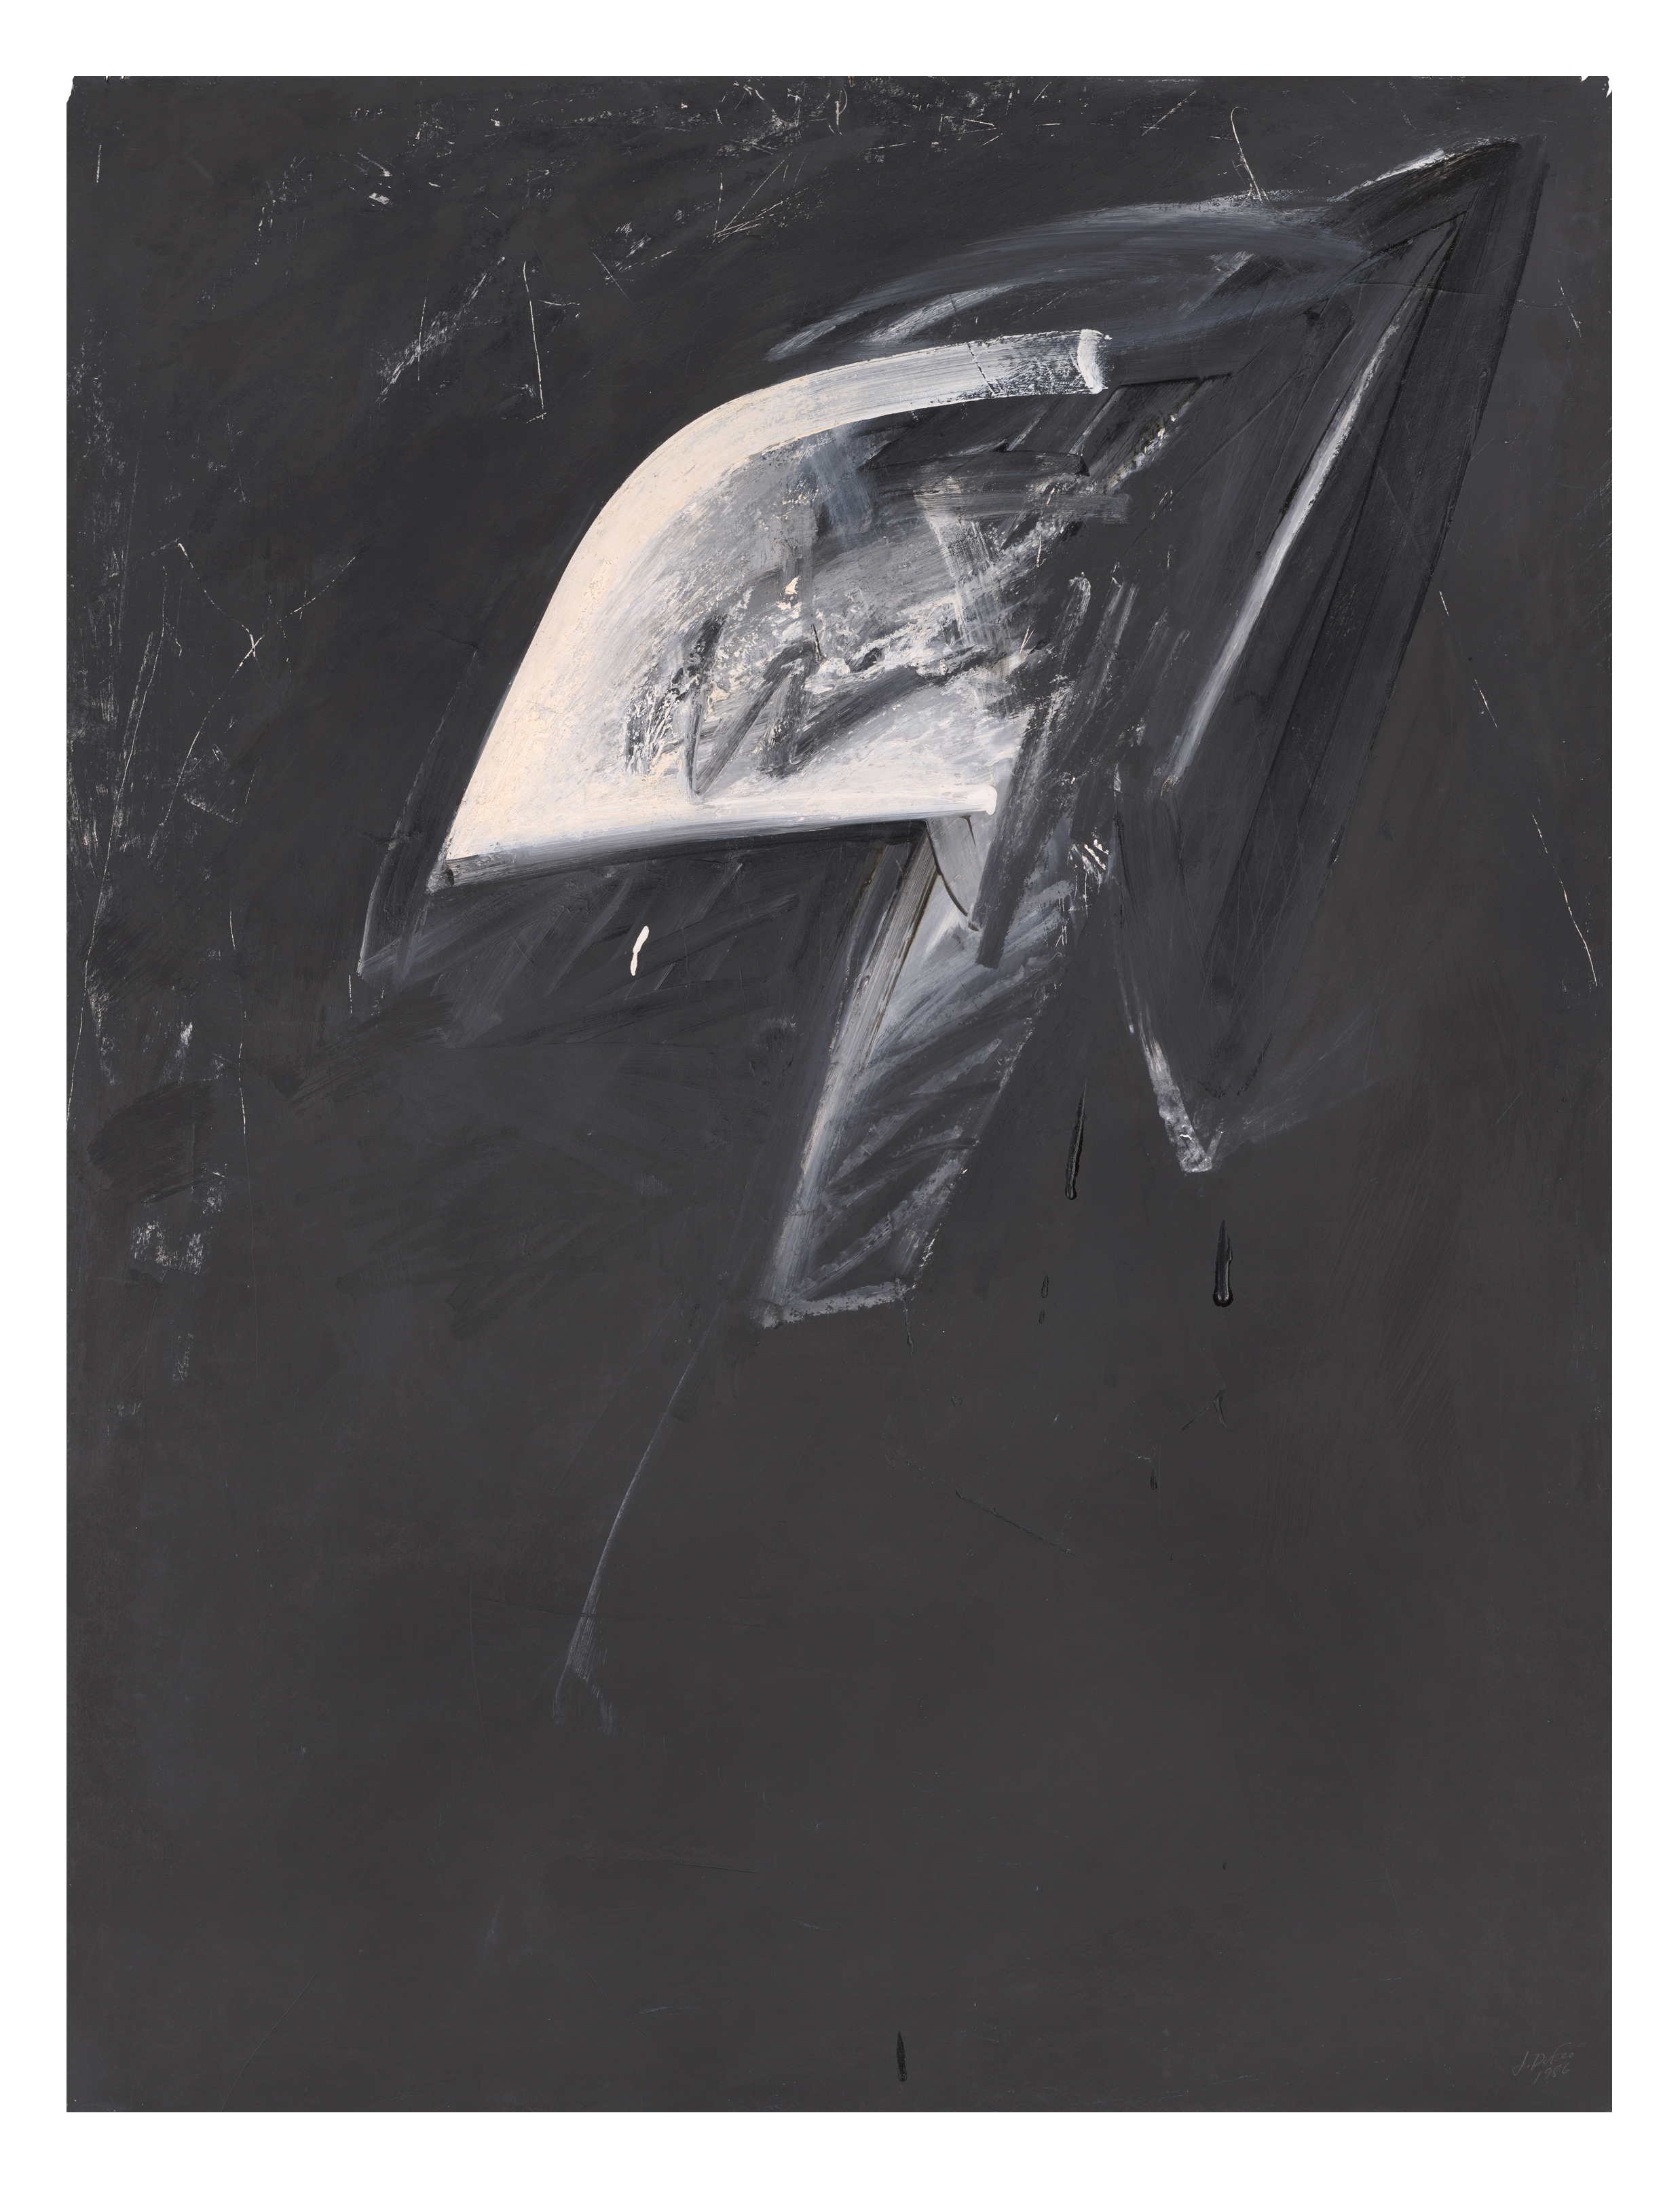   JAY DEFEO   Impressions of Africa No. 1 , (Estate no. E1031), 1986, oil and alkyd on paper, 50" x 38" 